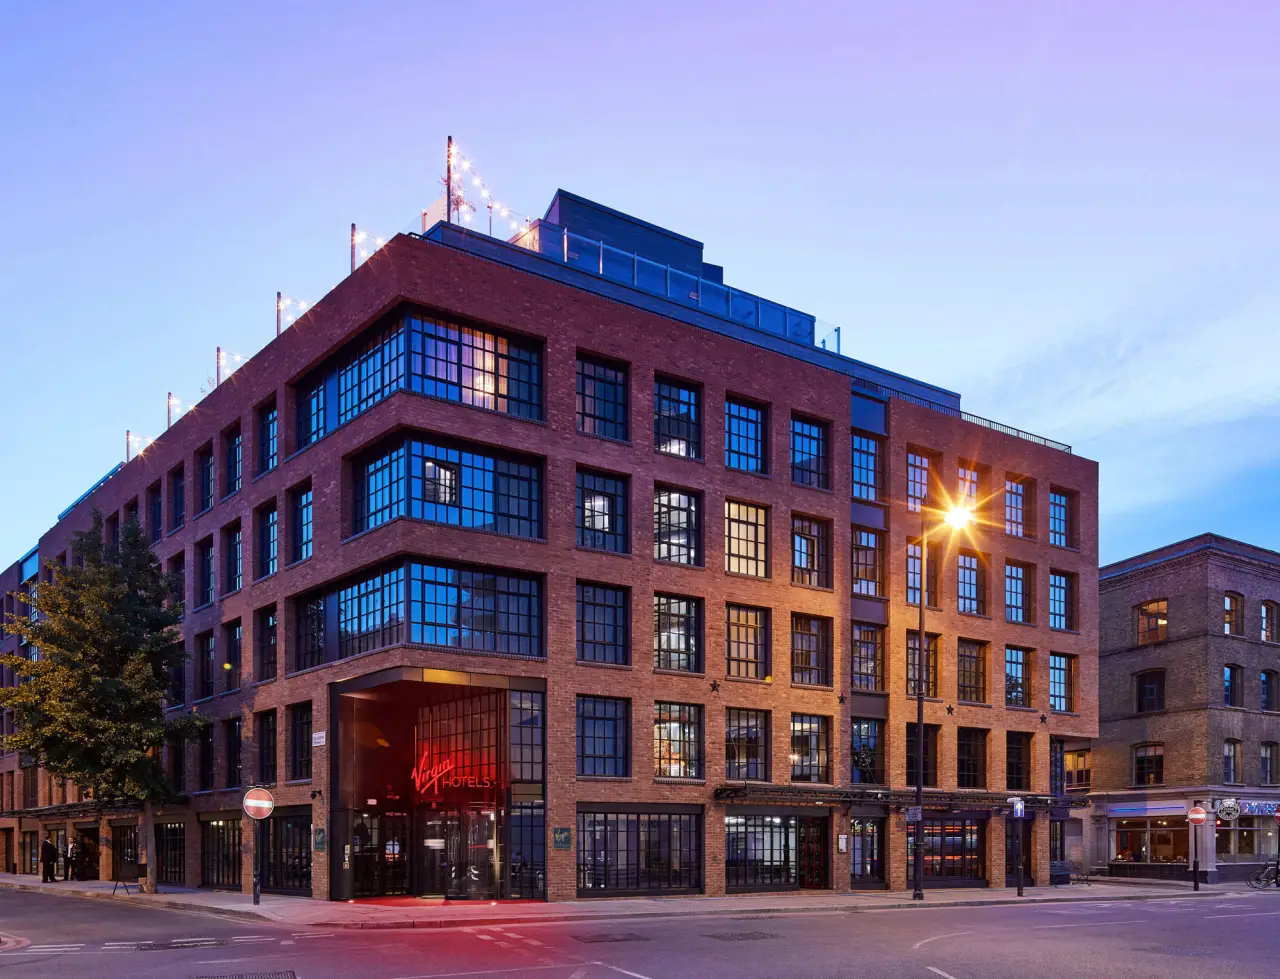 The exterior of Virgin Hotels London-Shoreditch, showcasing a modern brick building with large windows and a red Virgin Hotels sign illuminated at the entrance. The rooftop features string lights, hinting at an inviting rooftop bar area.